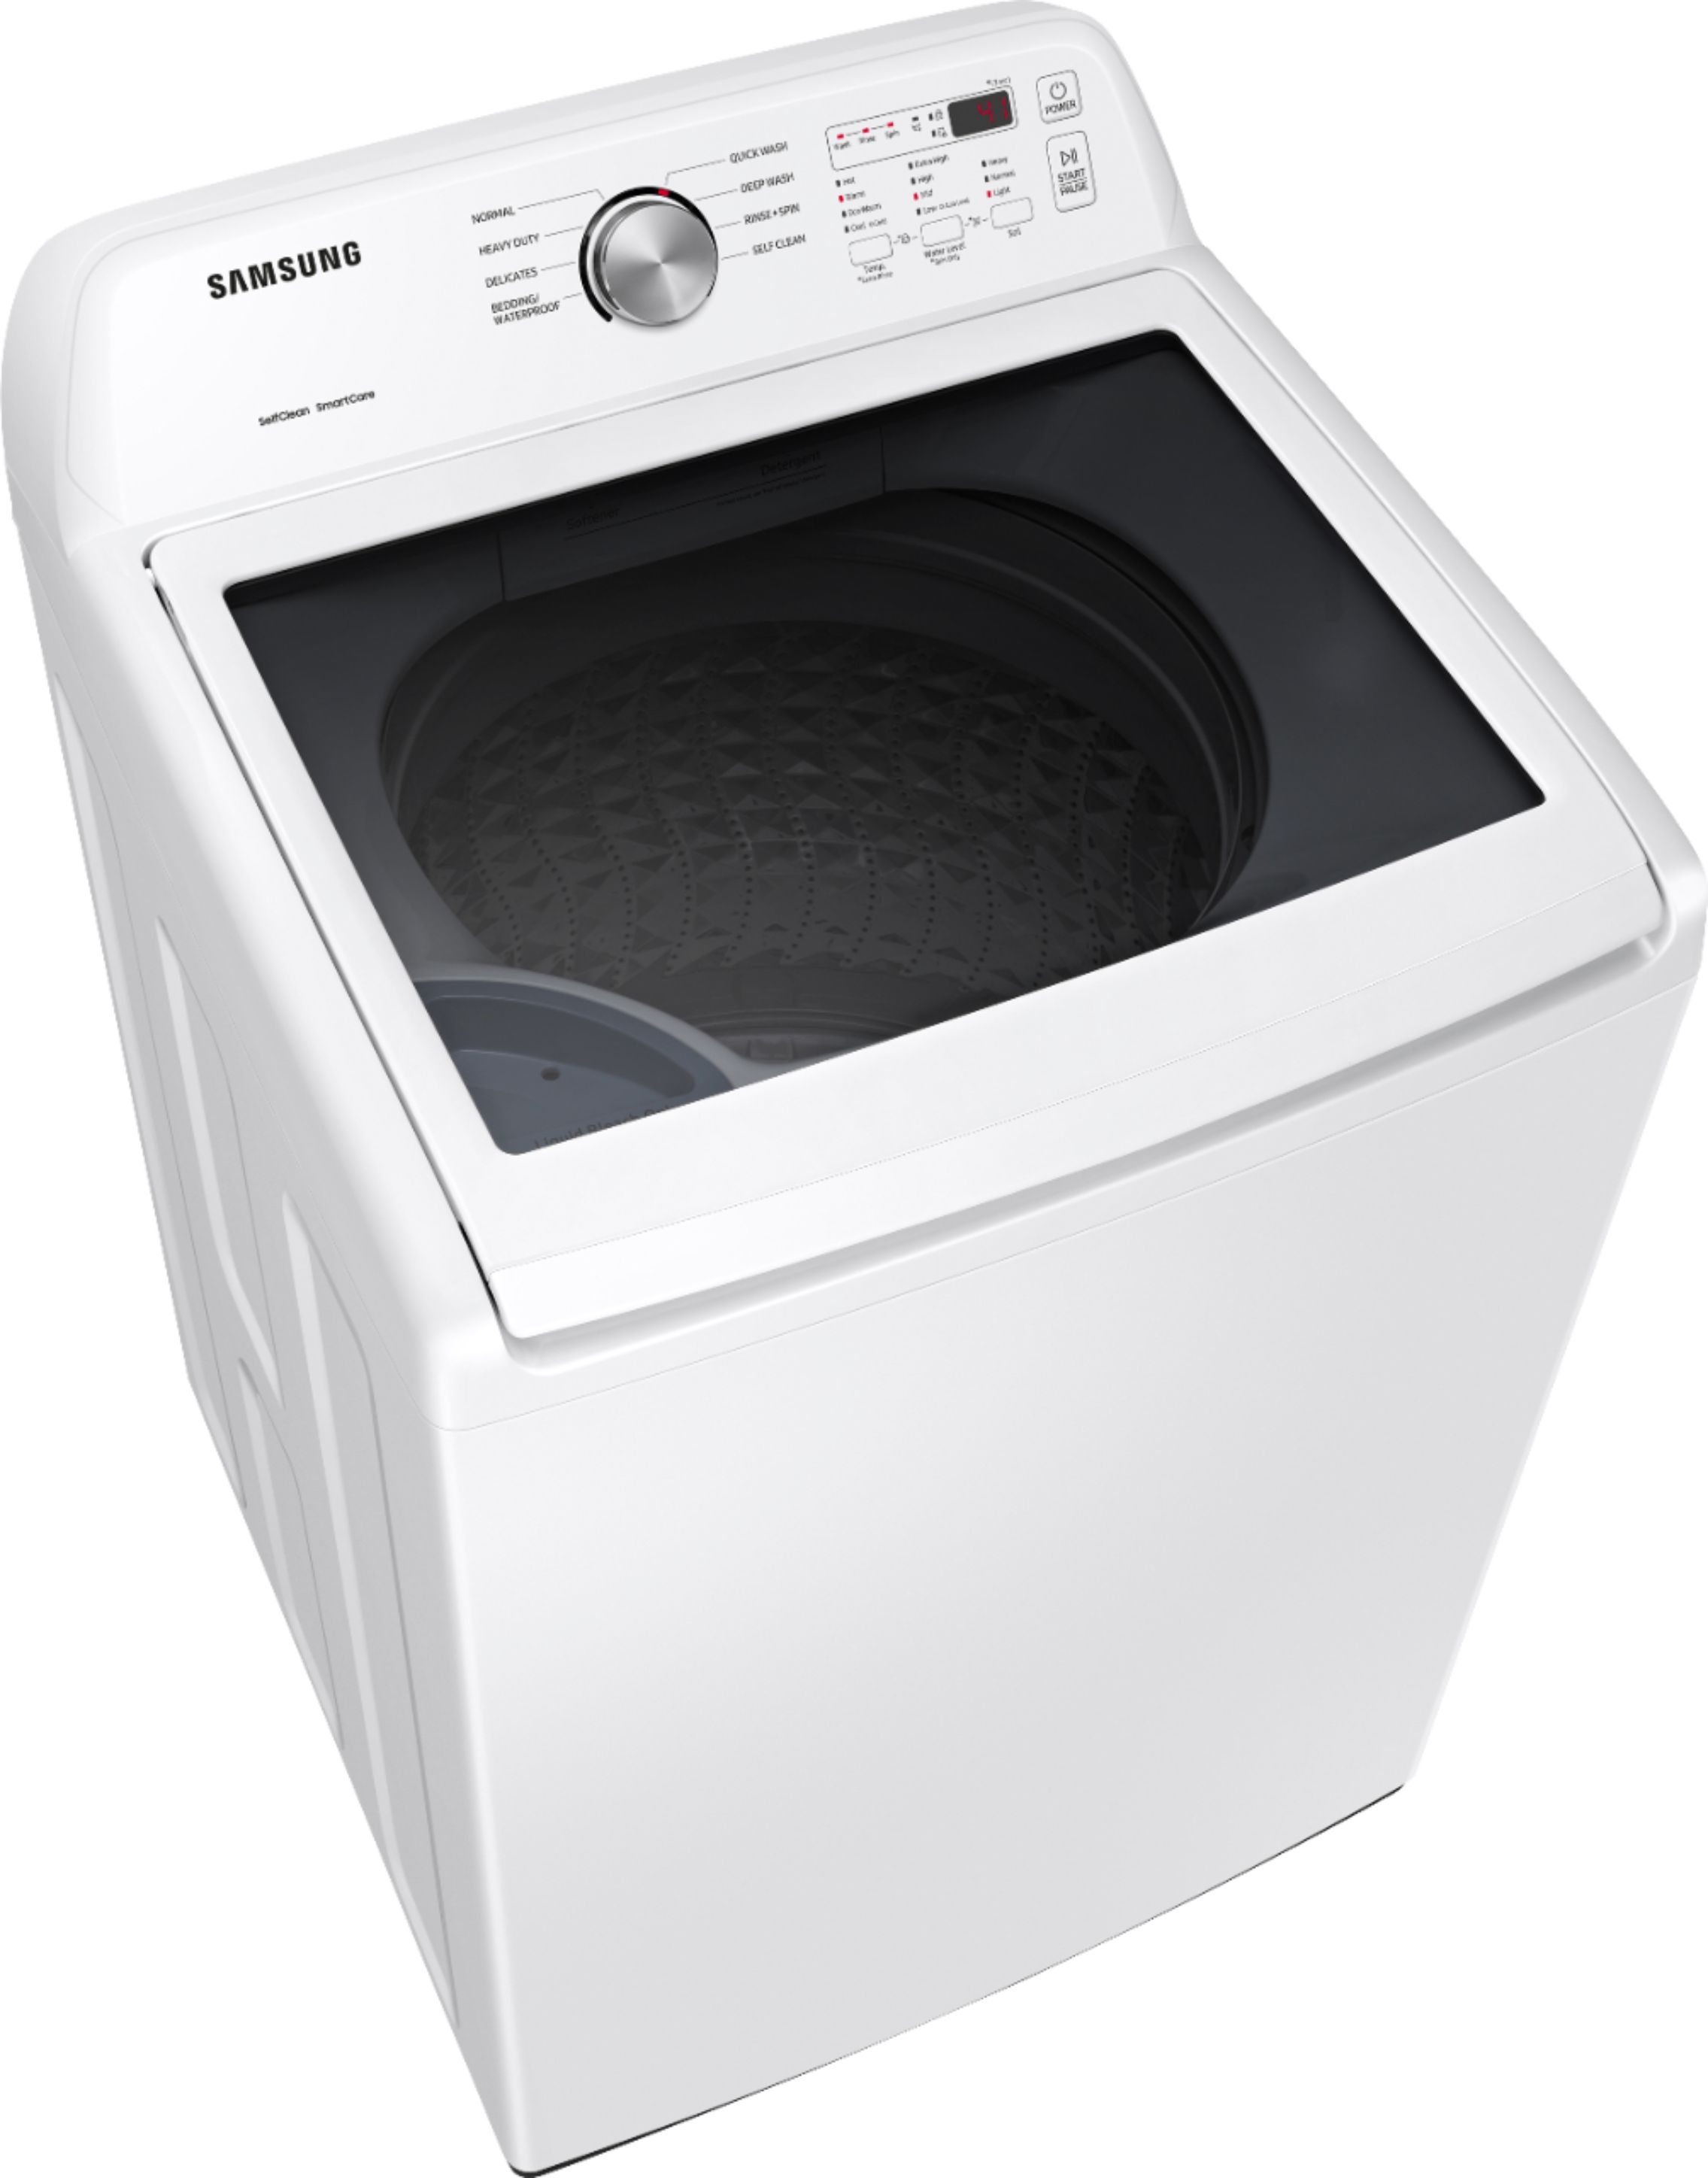 samsung-4-5-cu-ft-high-efficiency-top-load-washer-with-vibration